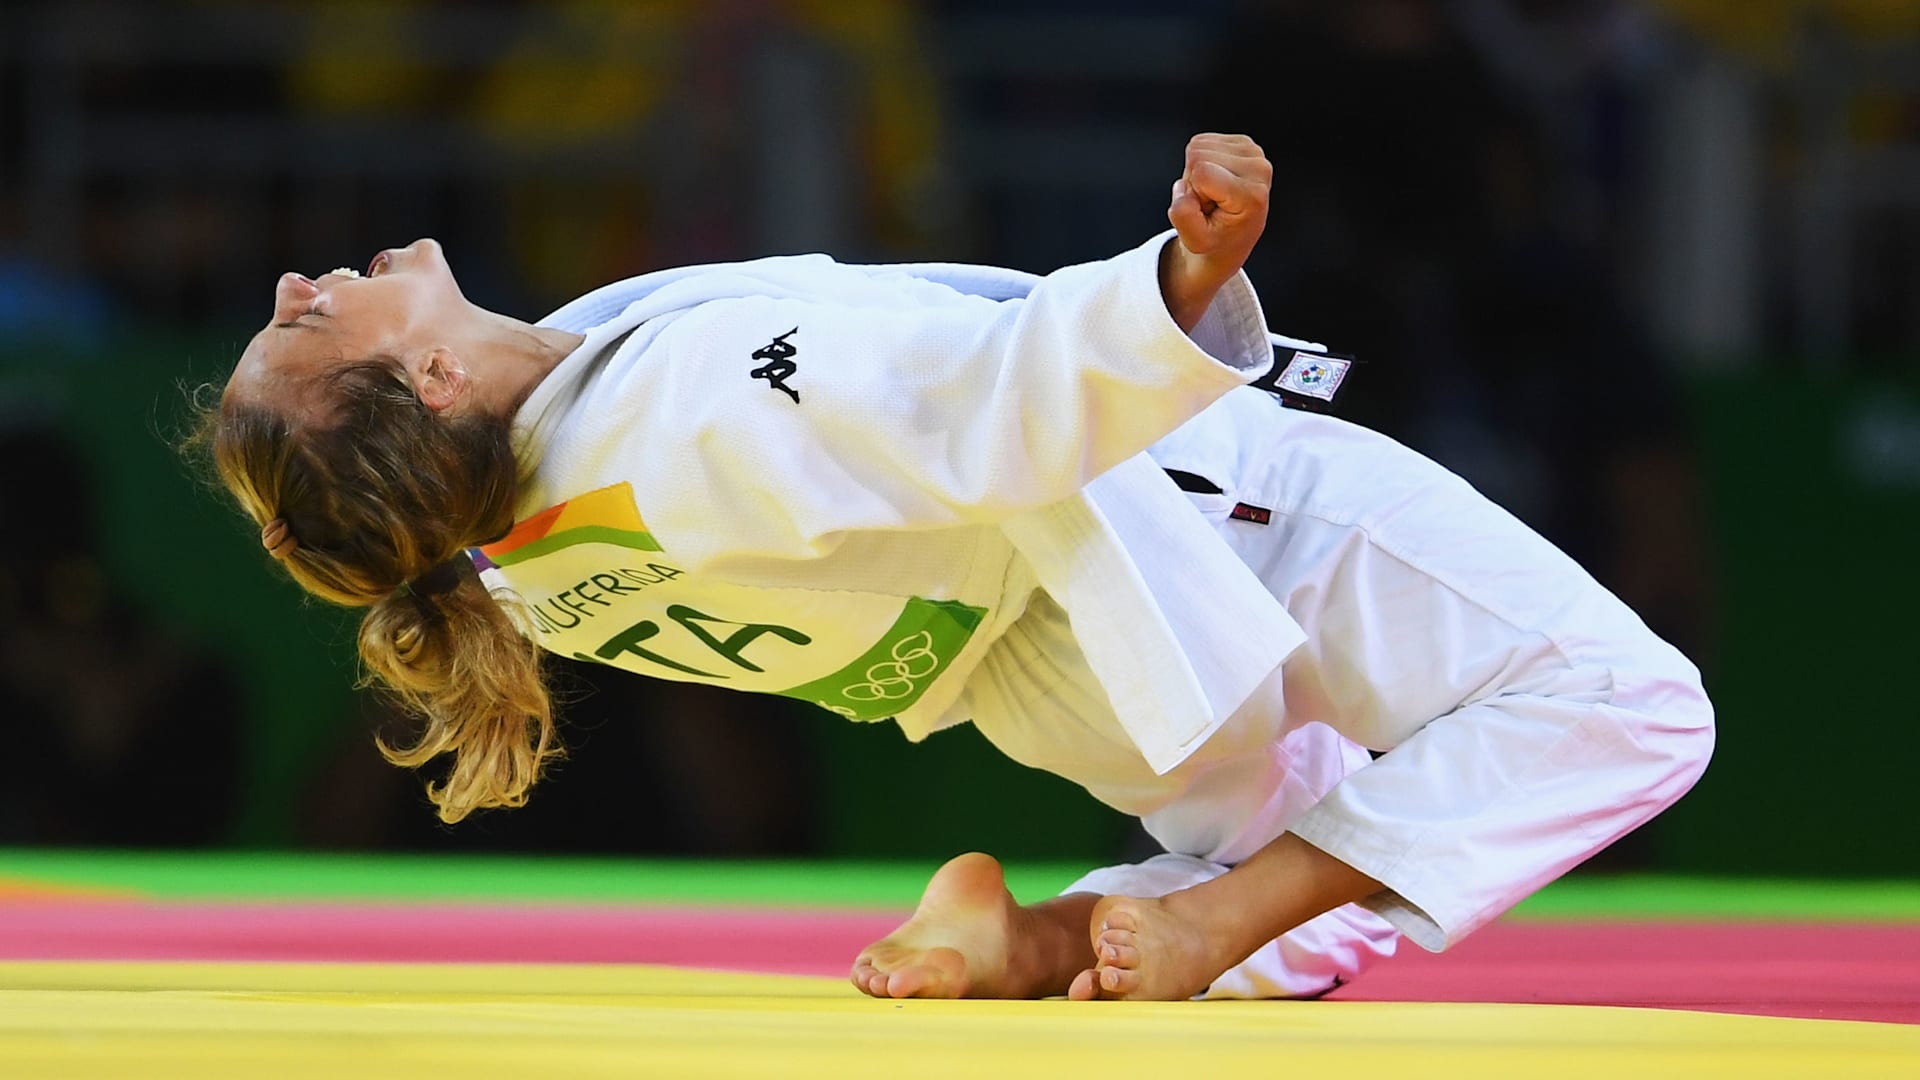 Results and highlights from Day 1 at the 2020 European Judo Championships